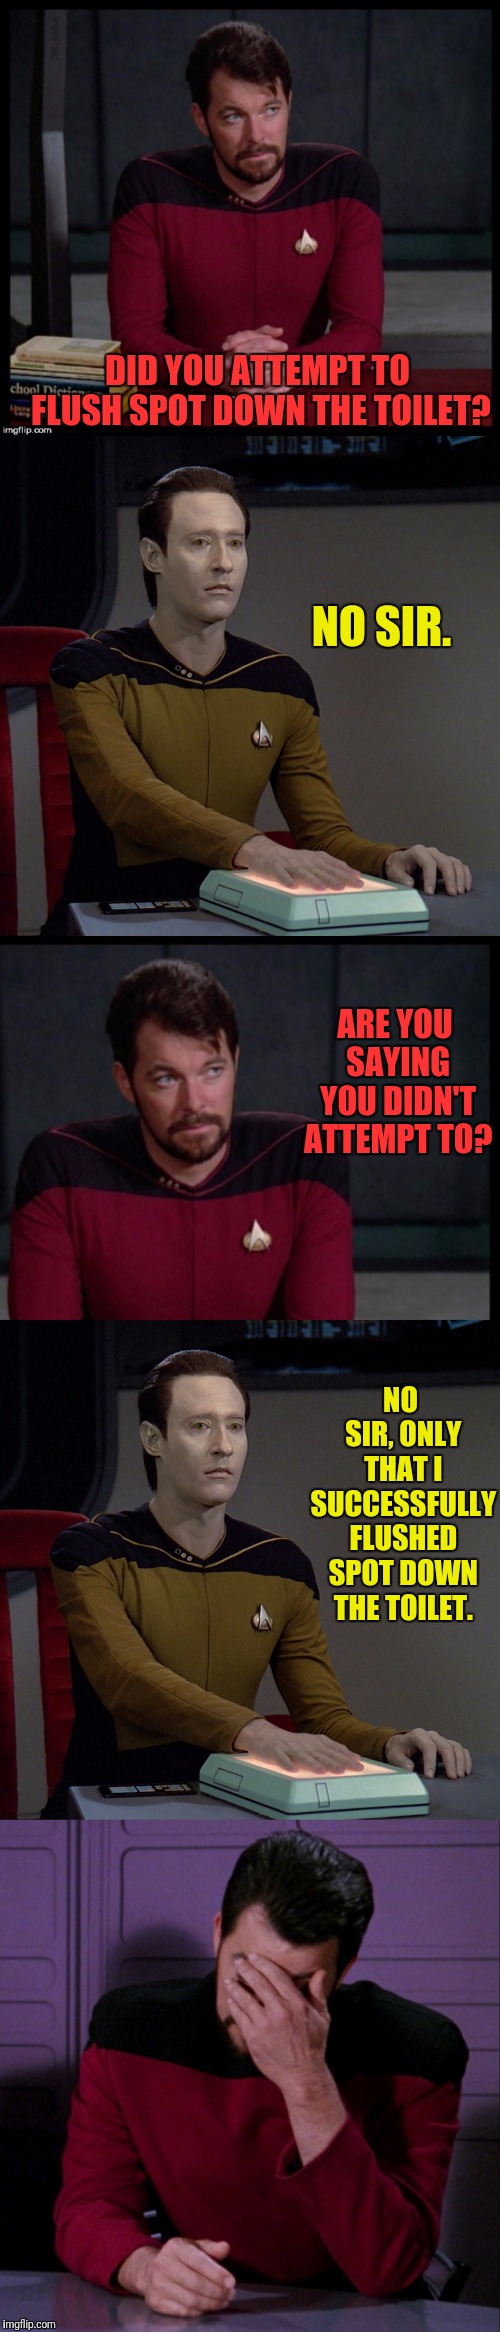 Running Down A Drain | DID YOU ATTEMPT TO FLUSH SPOT DOWN THE TOILET? NO SIR. ARE YOU SAYING YOU DIDN'T ATTEMPT TO? NO SIR, ONLY THAT I SUCCESSFULLY FLUSHED SPOT DOWN THE TOILET. | image tagged in star trek the next generation,riker,star trek data,data | made w/ Imgflip meme maker